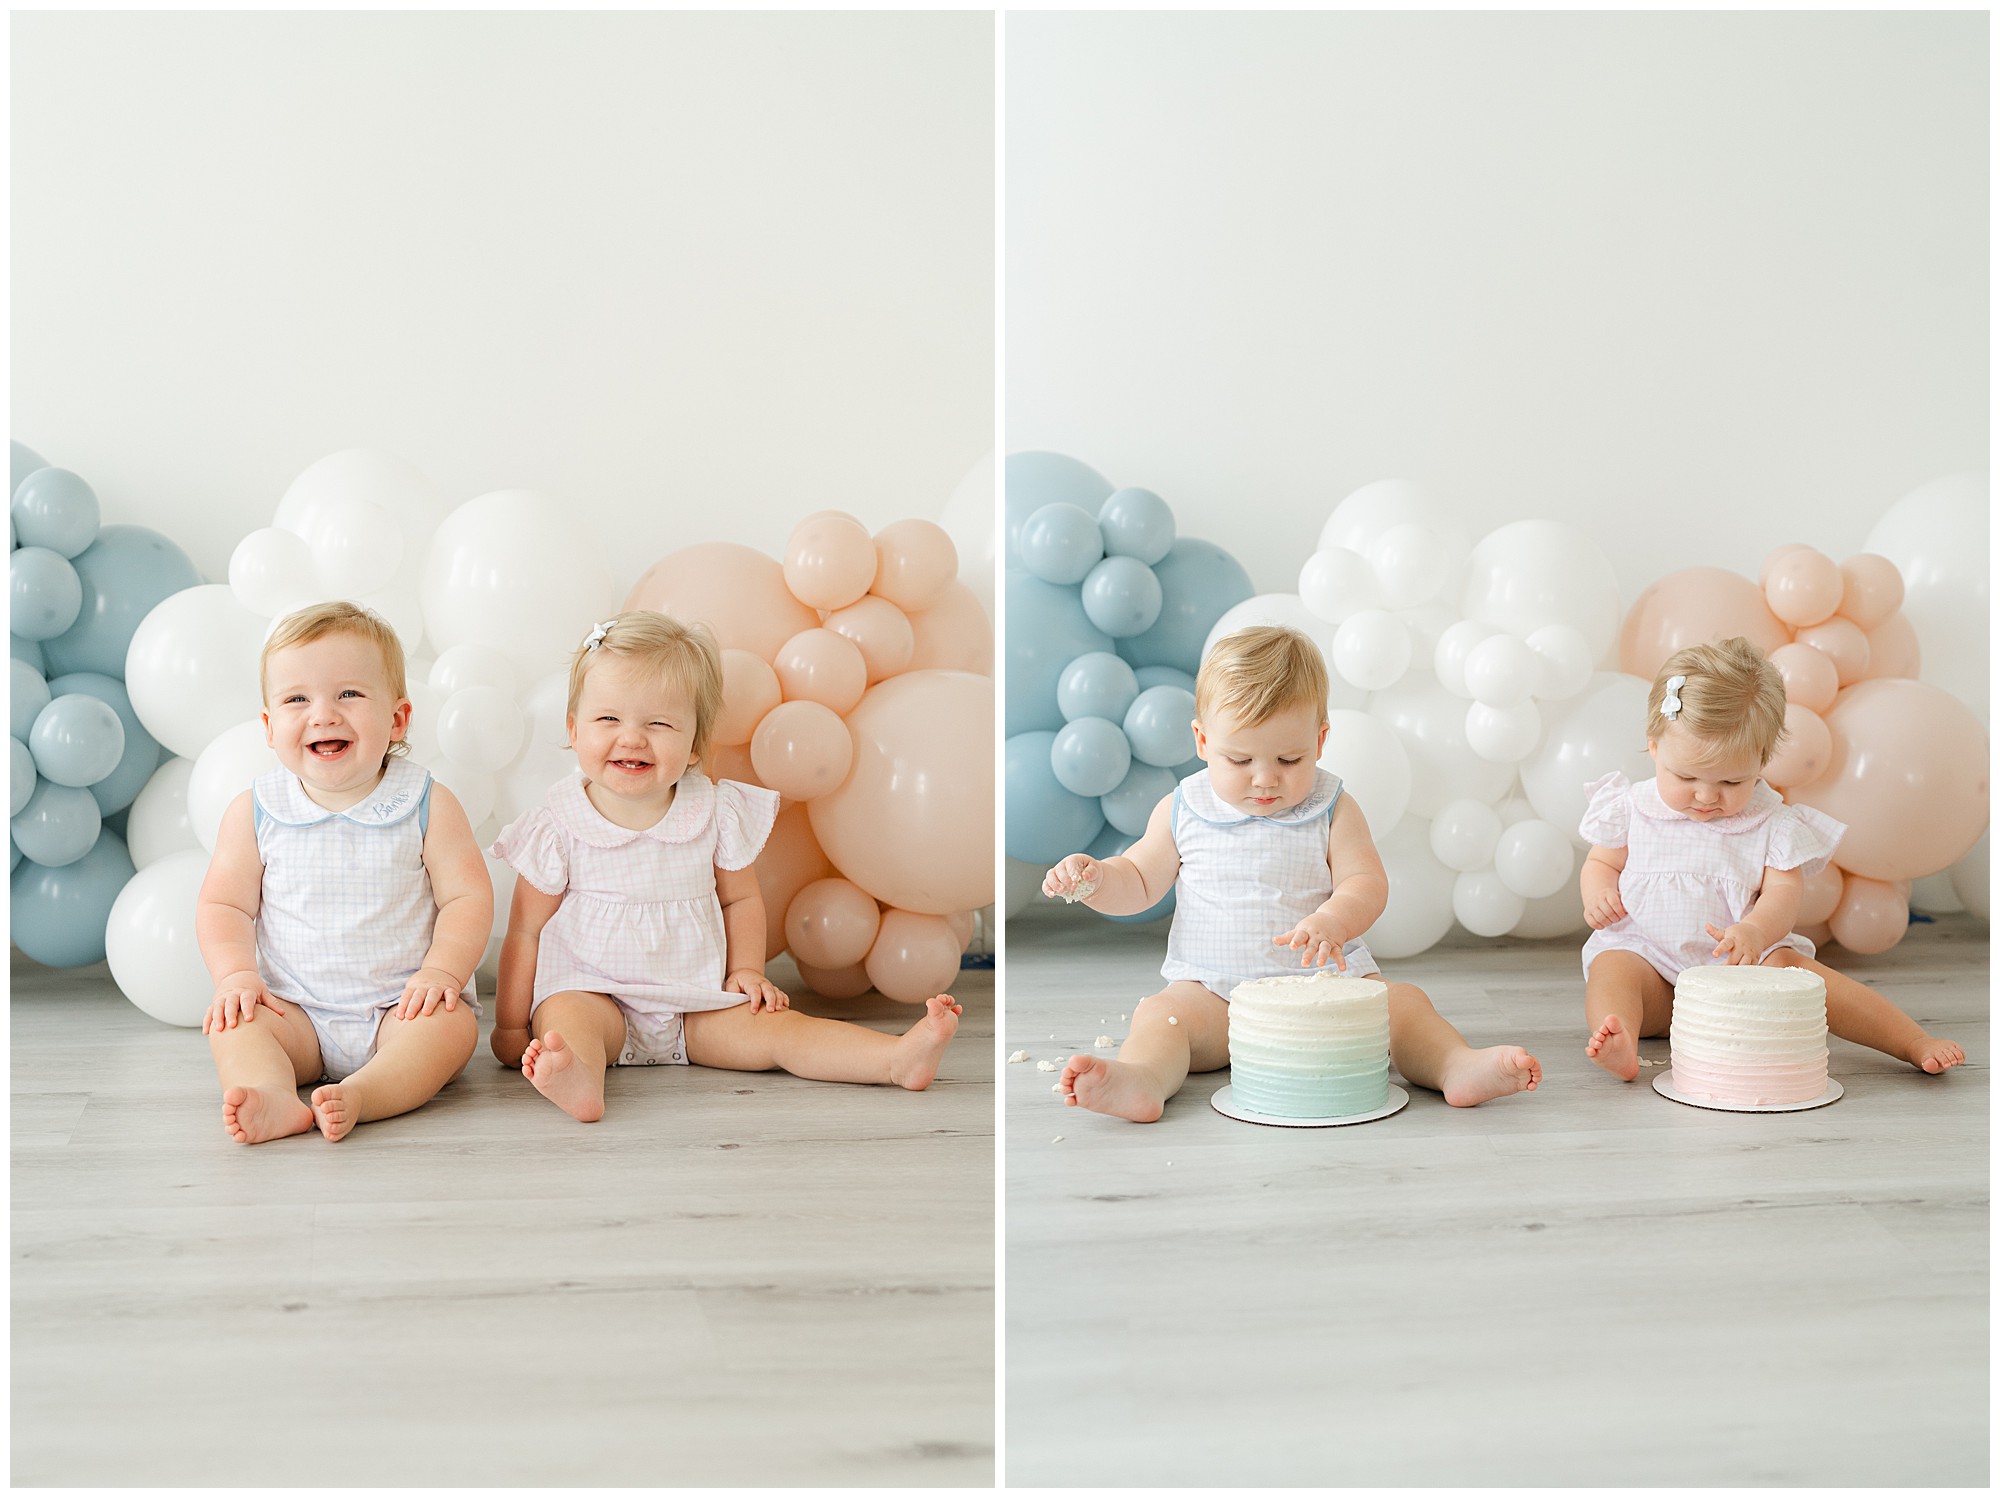 A one year old girl and boy smiling for portraits in front of a blue, white, and pink balloon garland during their Atlanta Cake Smash session for twins